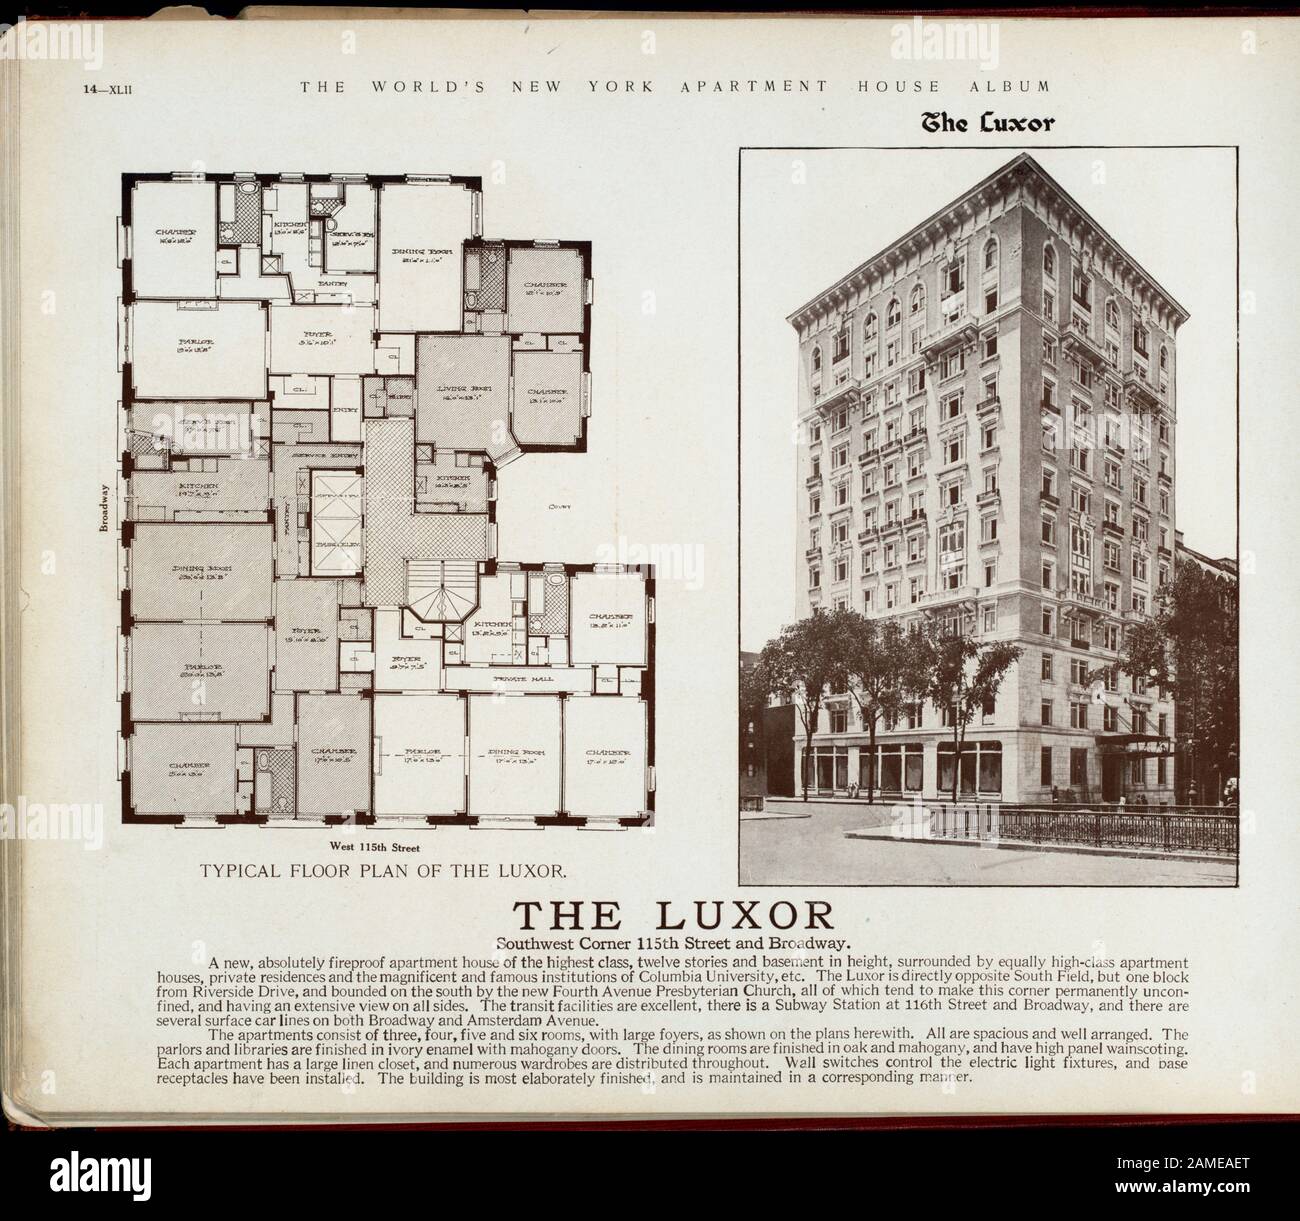 The Luxor Southwest Corner 115th Street and Broadway  The Luxor. Southwest Corner 115th Street and Broadway.; The Luxor. Southwest Corner 115th Street and Broadway. Stock Photo